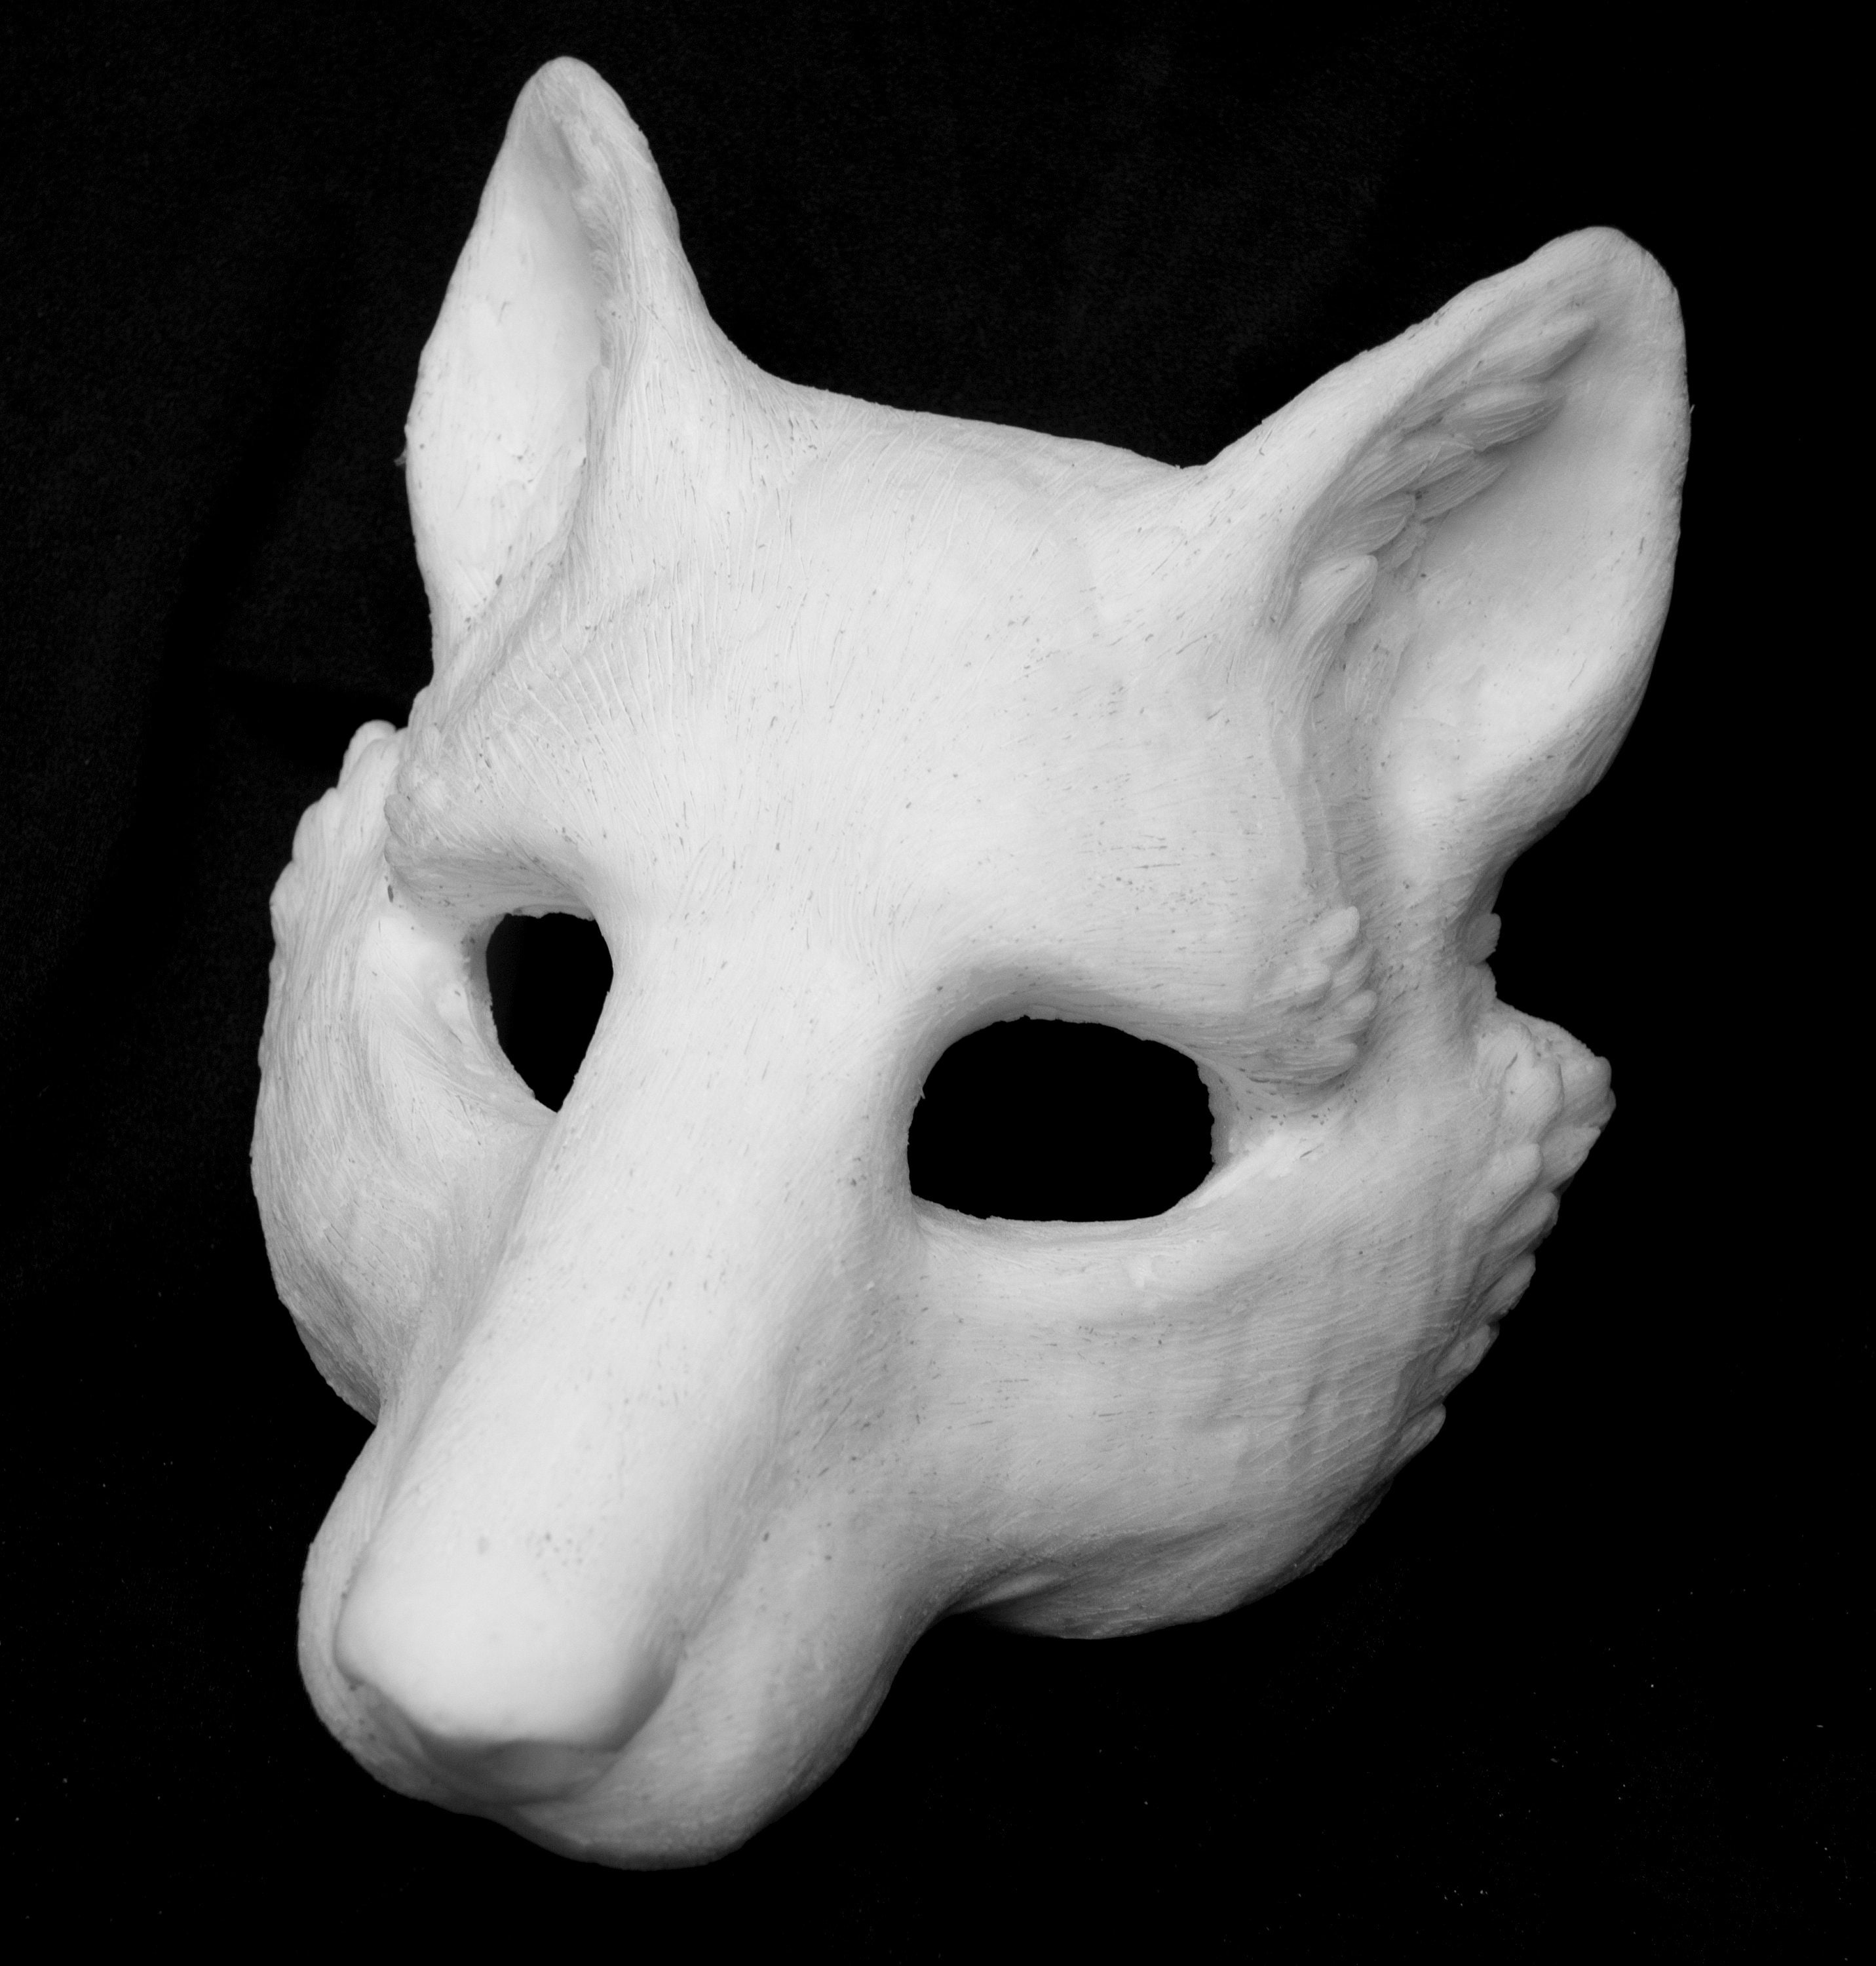 Fox, Vulpine Mask, Unpainted, Soft Foam for LARP Combat Theatre, Festivals,  Performance, Masquerade and Other Costumes -  Norway